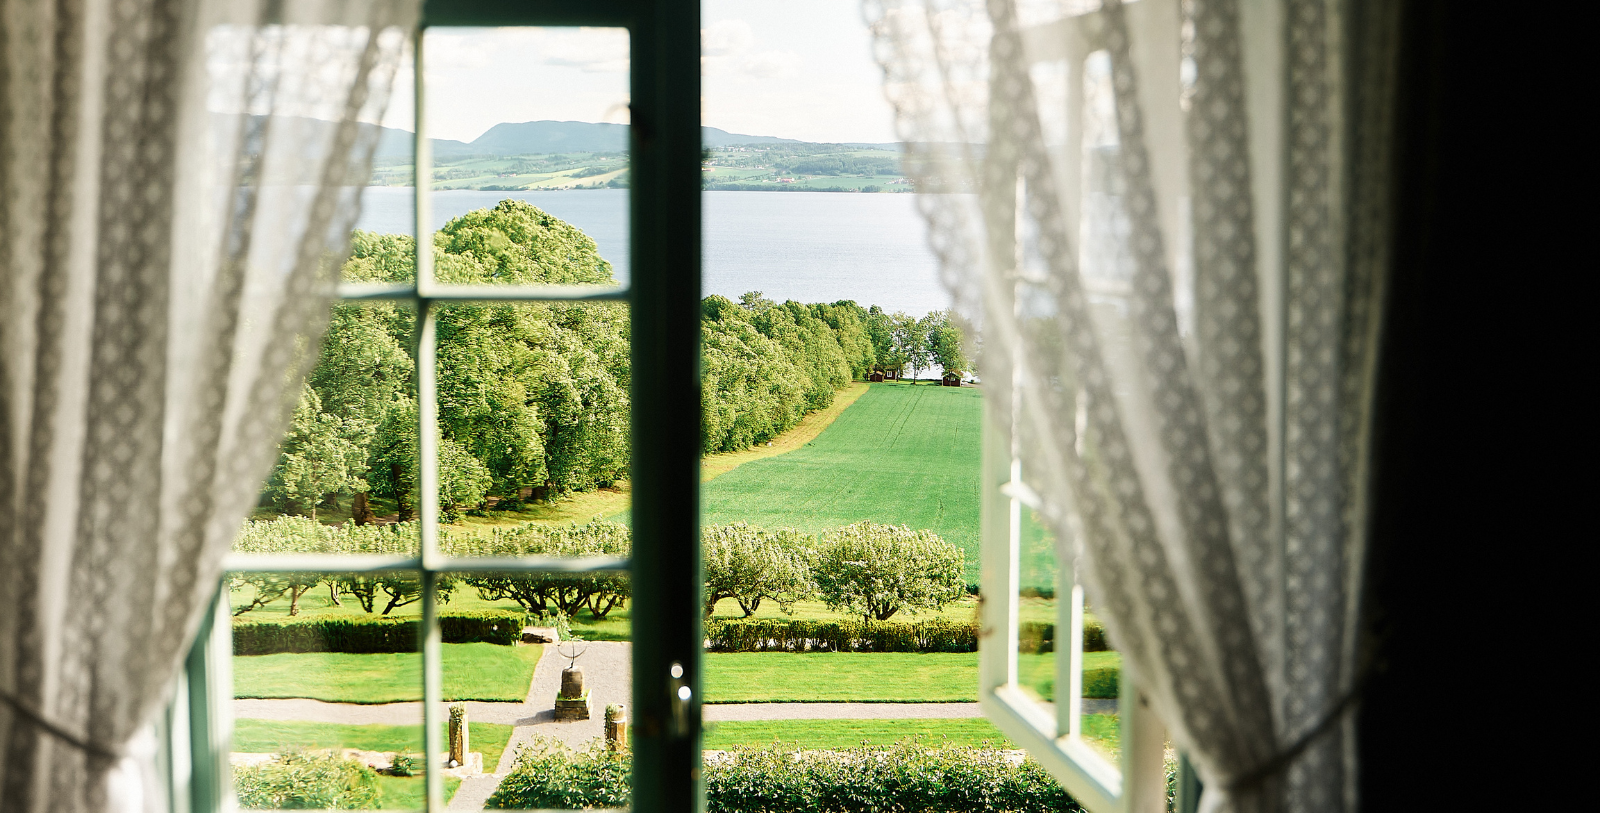 Get whisked away to the Norwegian countryside for a peaceful and relaxing retreat at Hoel Gård.